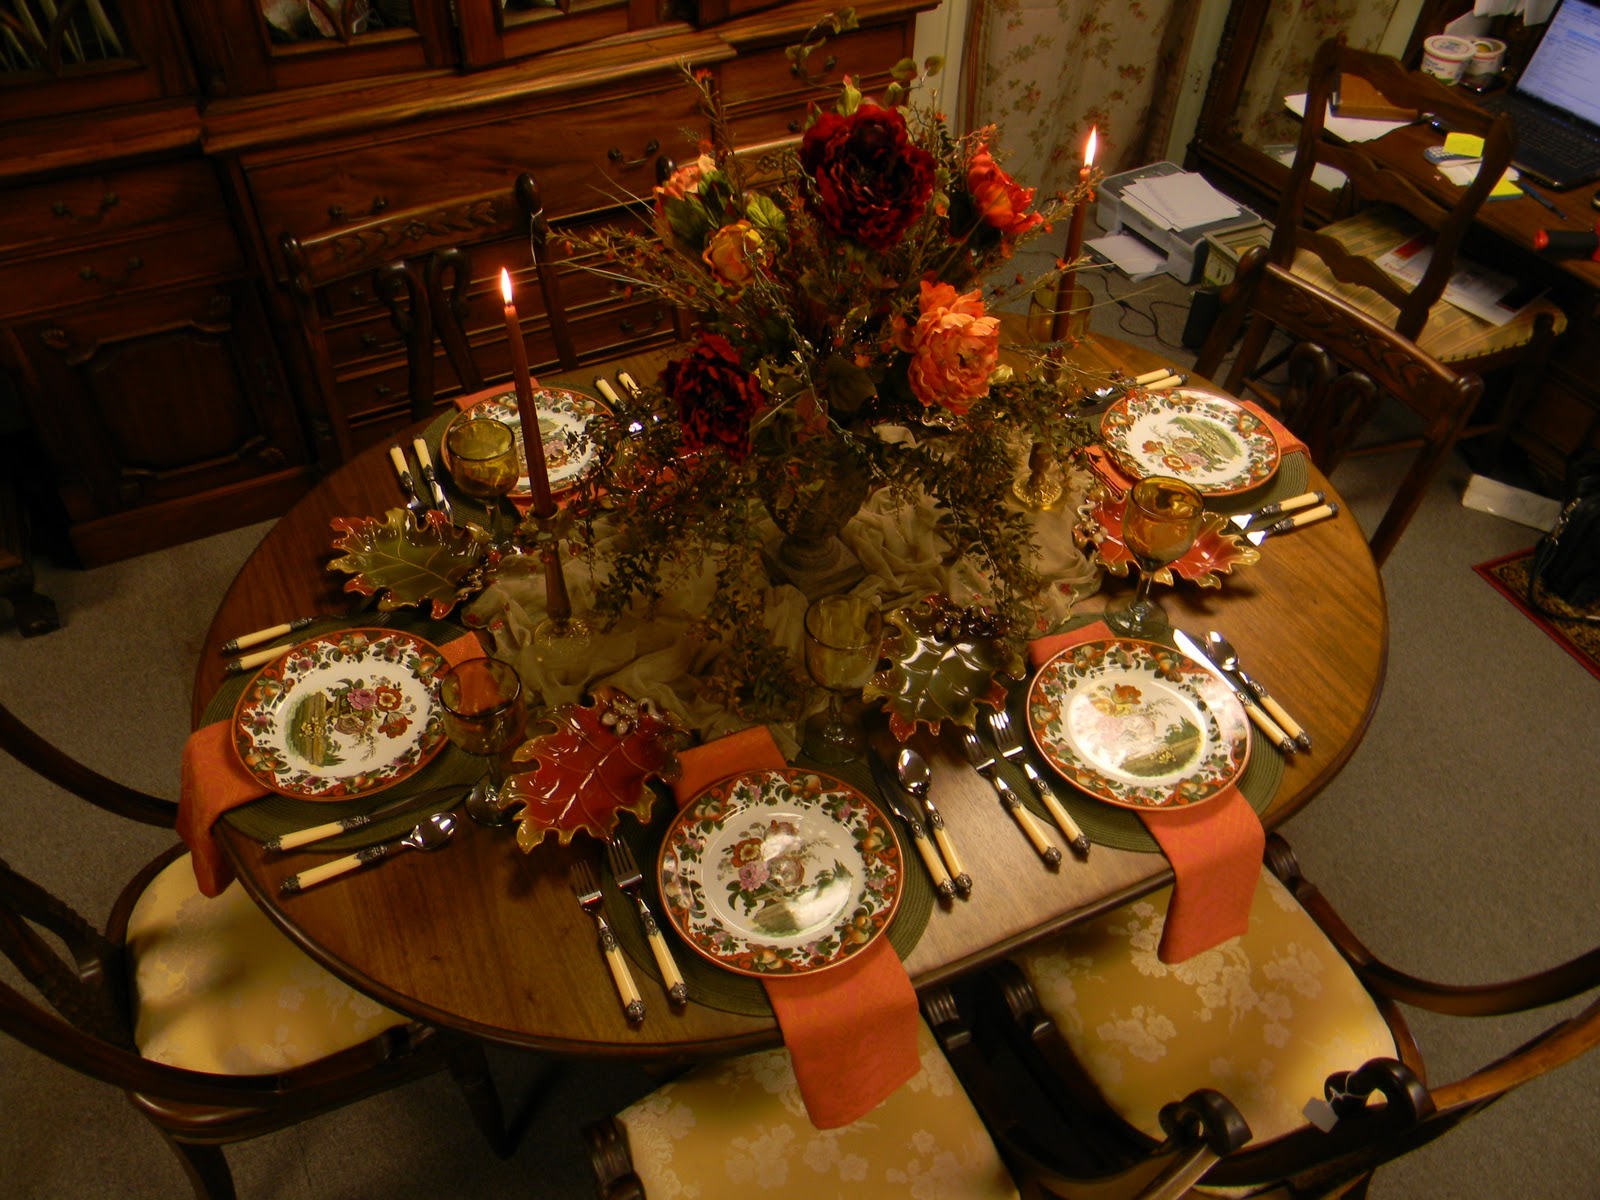 Polychrome Transferware - Royal Doulton Pomeroy in a Fall Tablescape